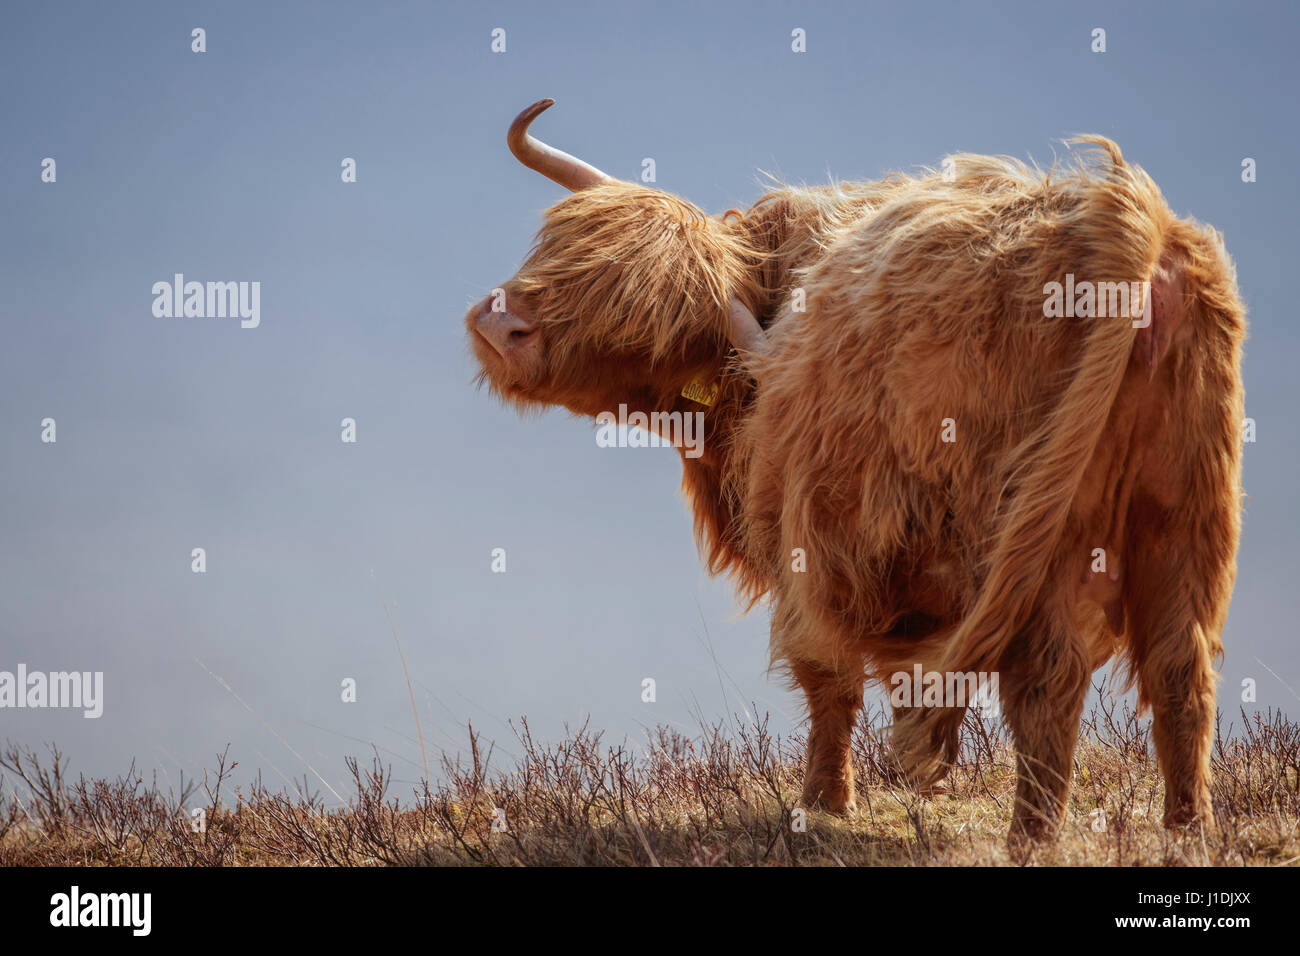 Highland Cow, Highland Cattle, Hairy Moo Coo Stock Photo